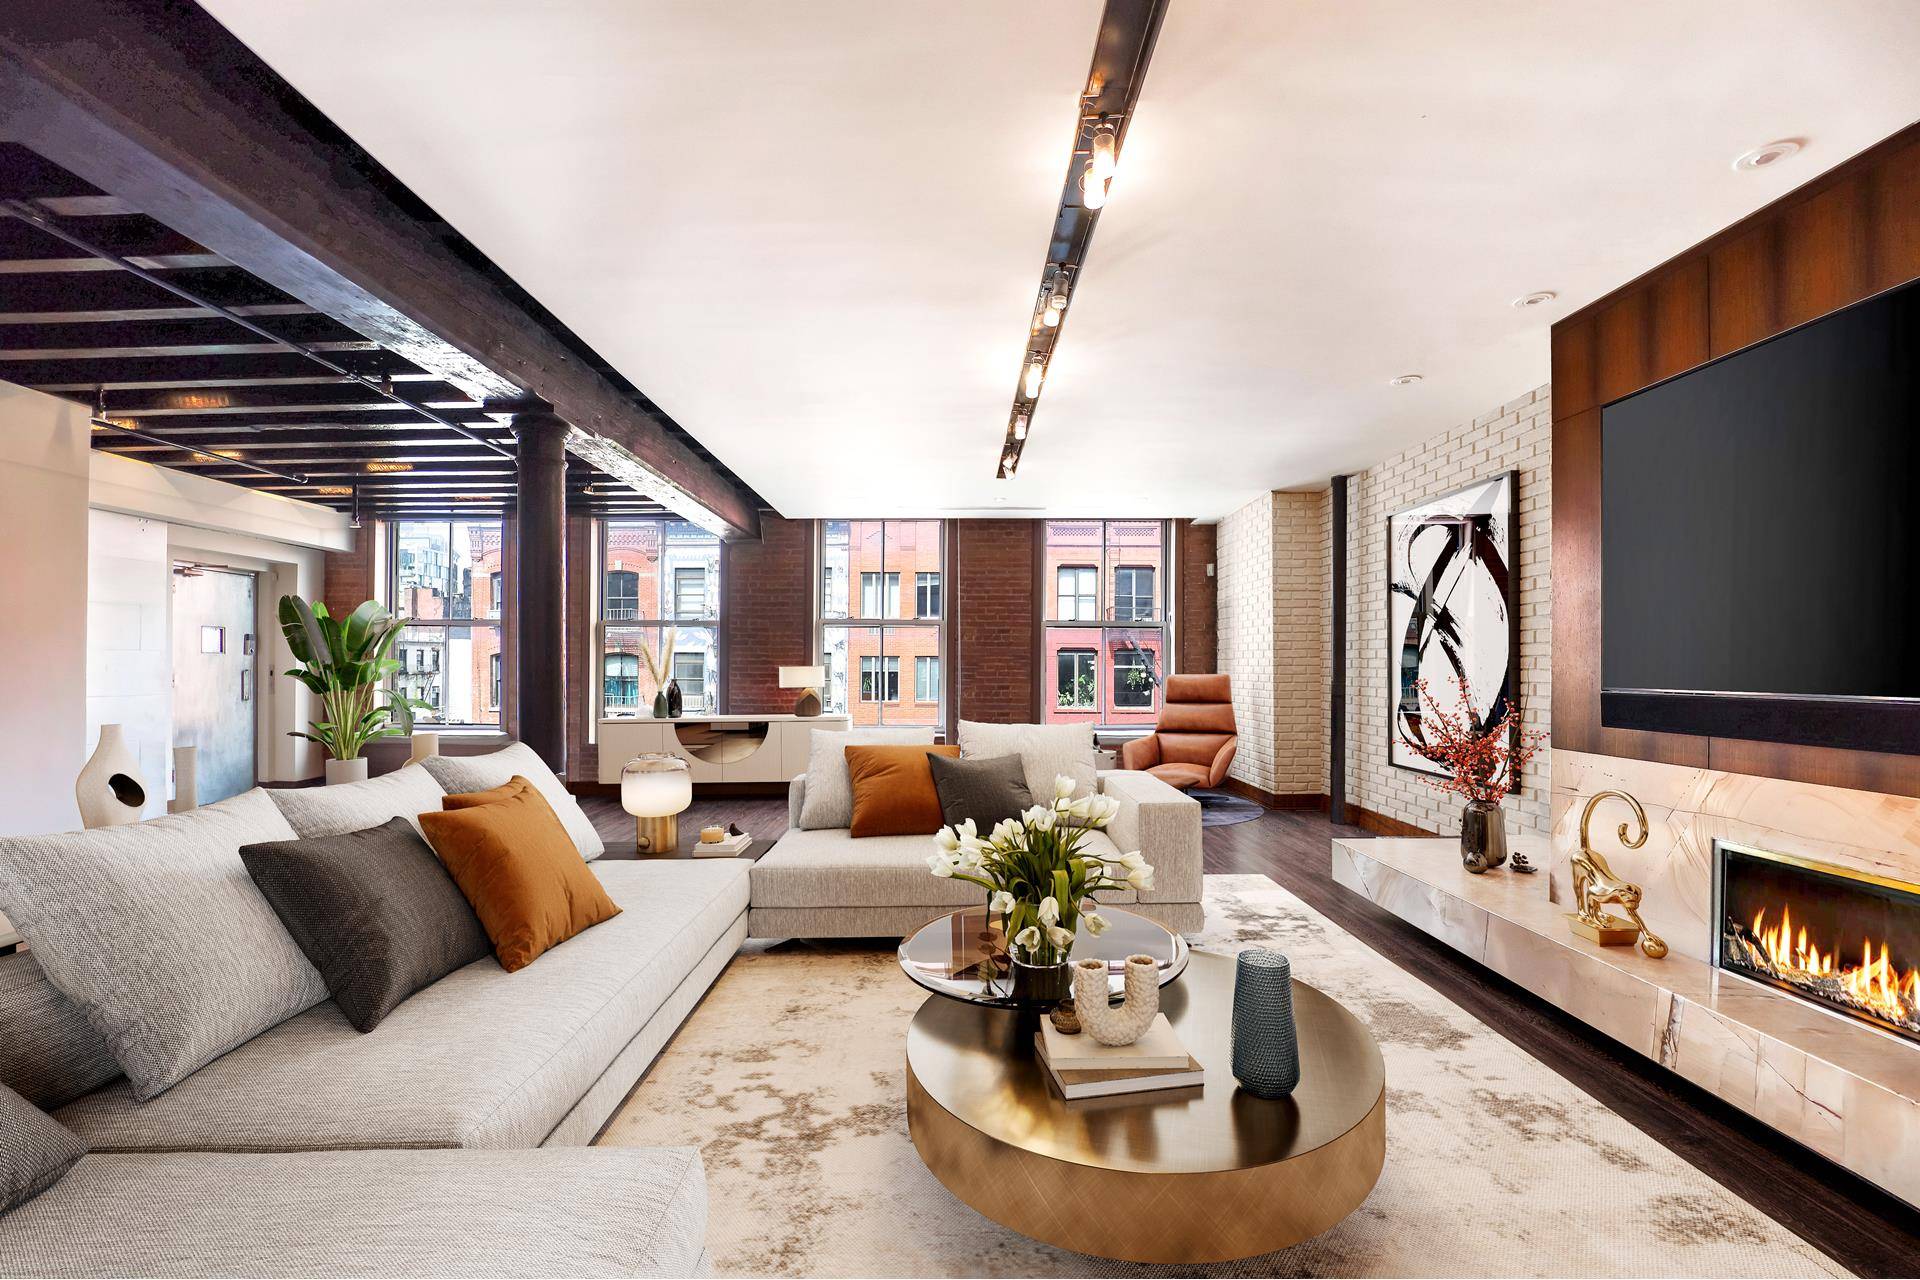 We are thrilled to present this stylish, authentic Soho loft offering privacy and the ultimate Soho lifestyle experience.